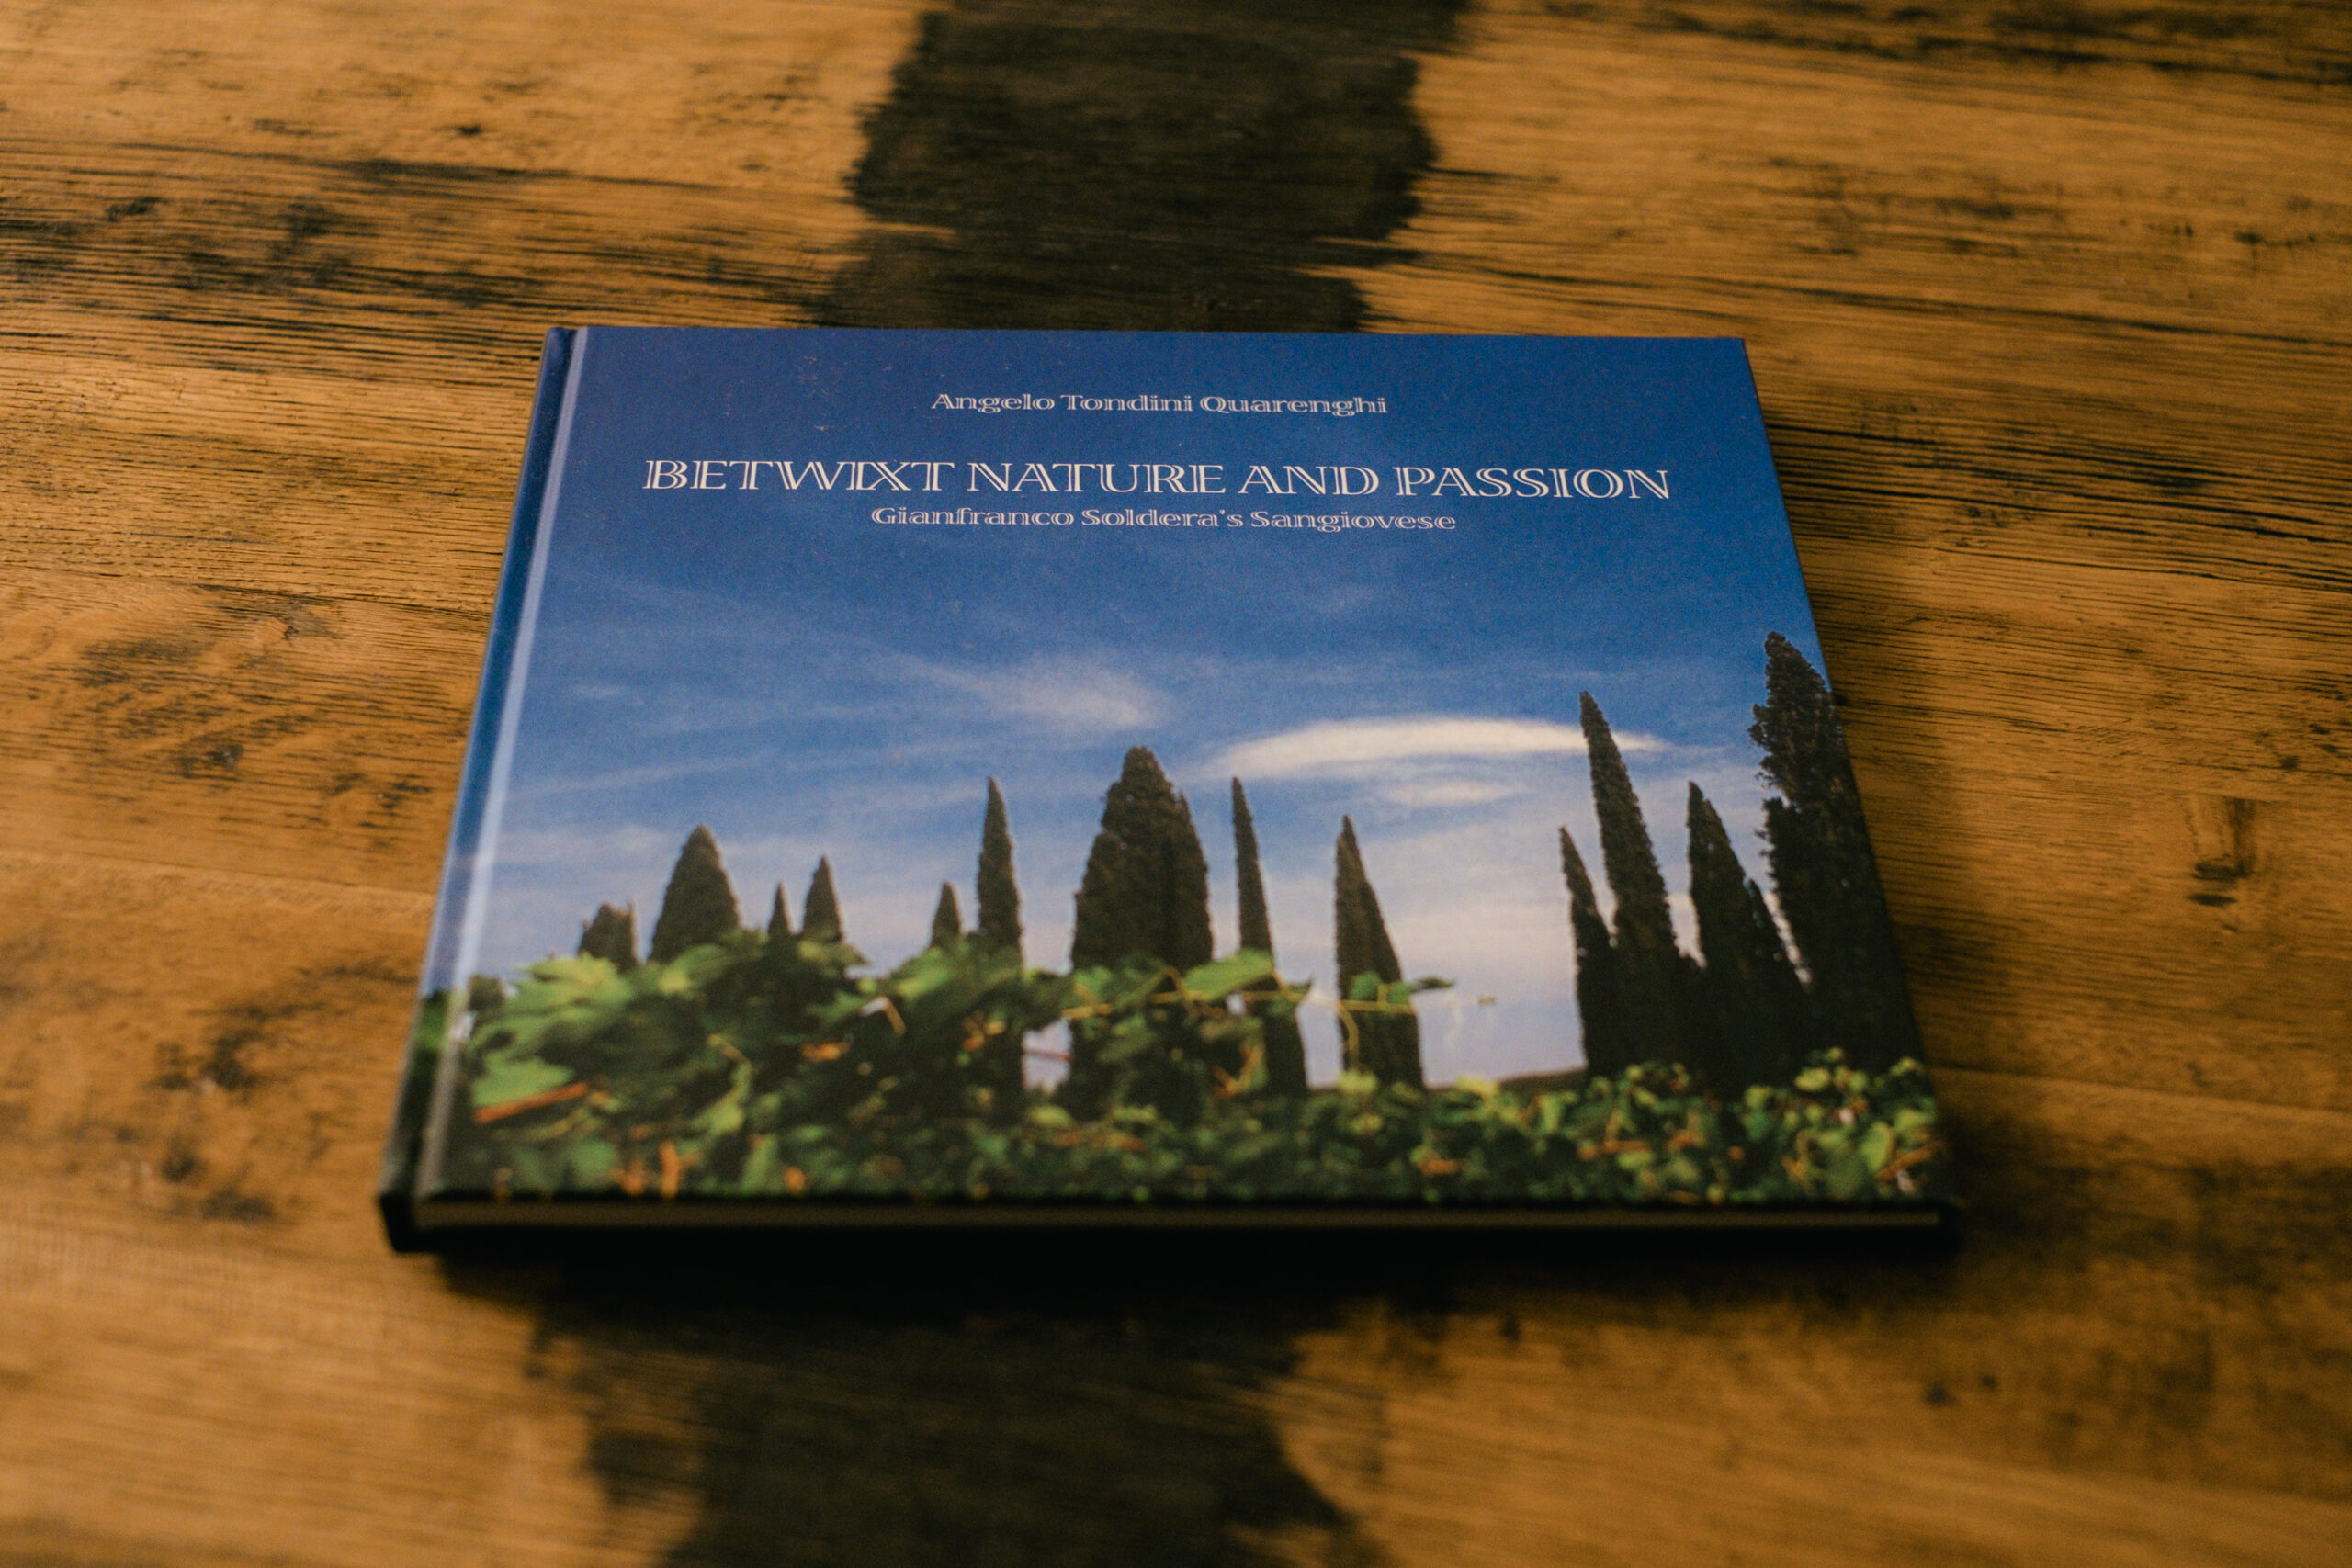 “Betwixt nature and passion”, Case Basse and Sangiovese for Gianfranco Soldera: the book